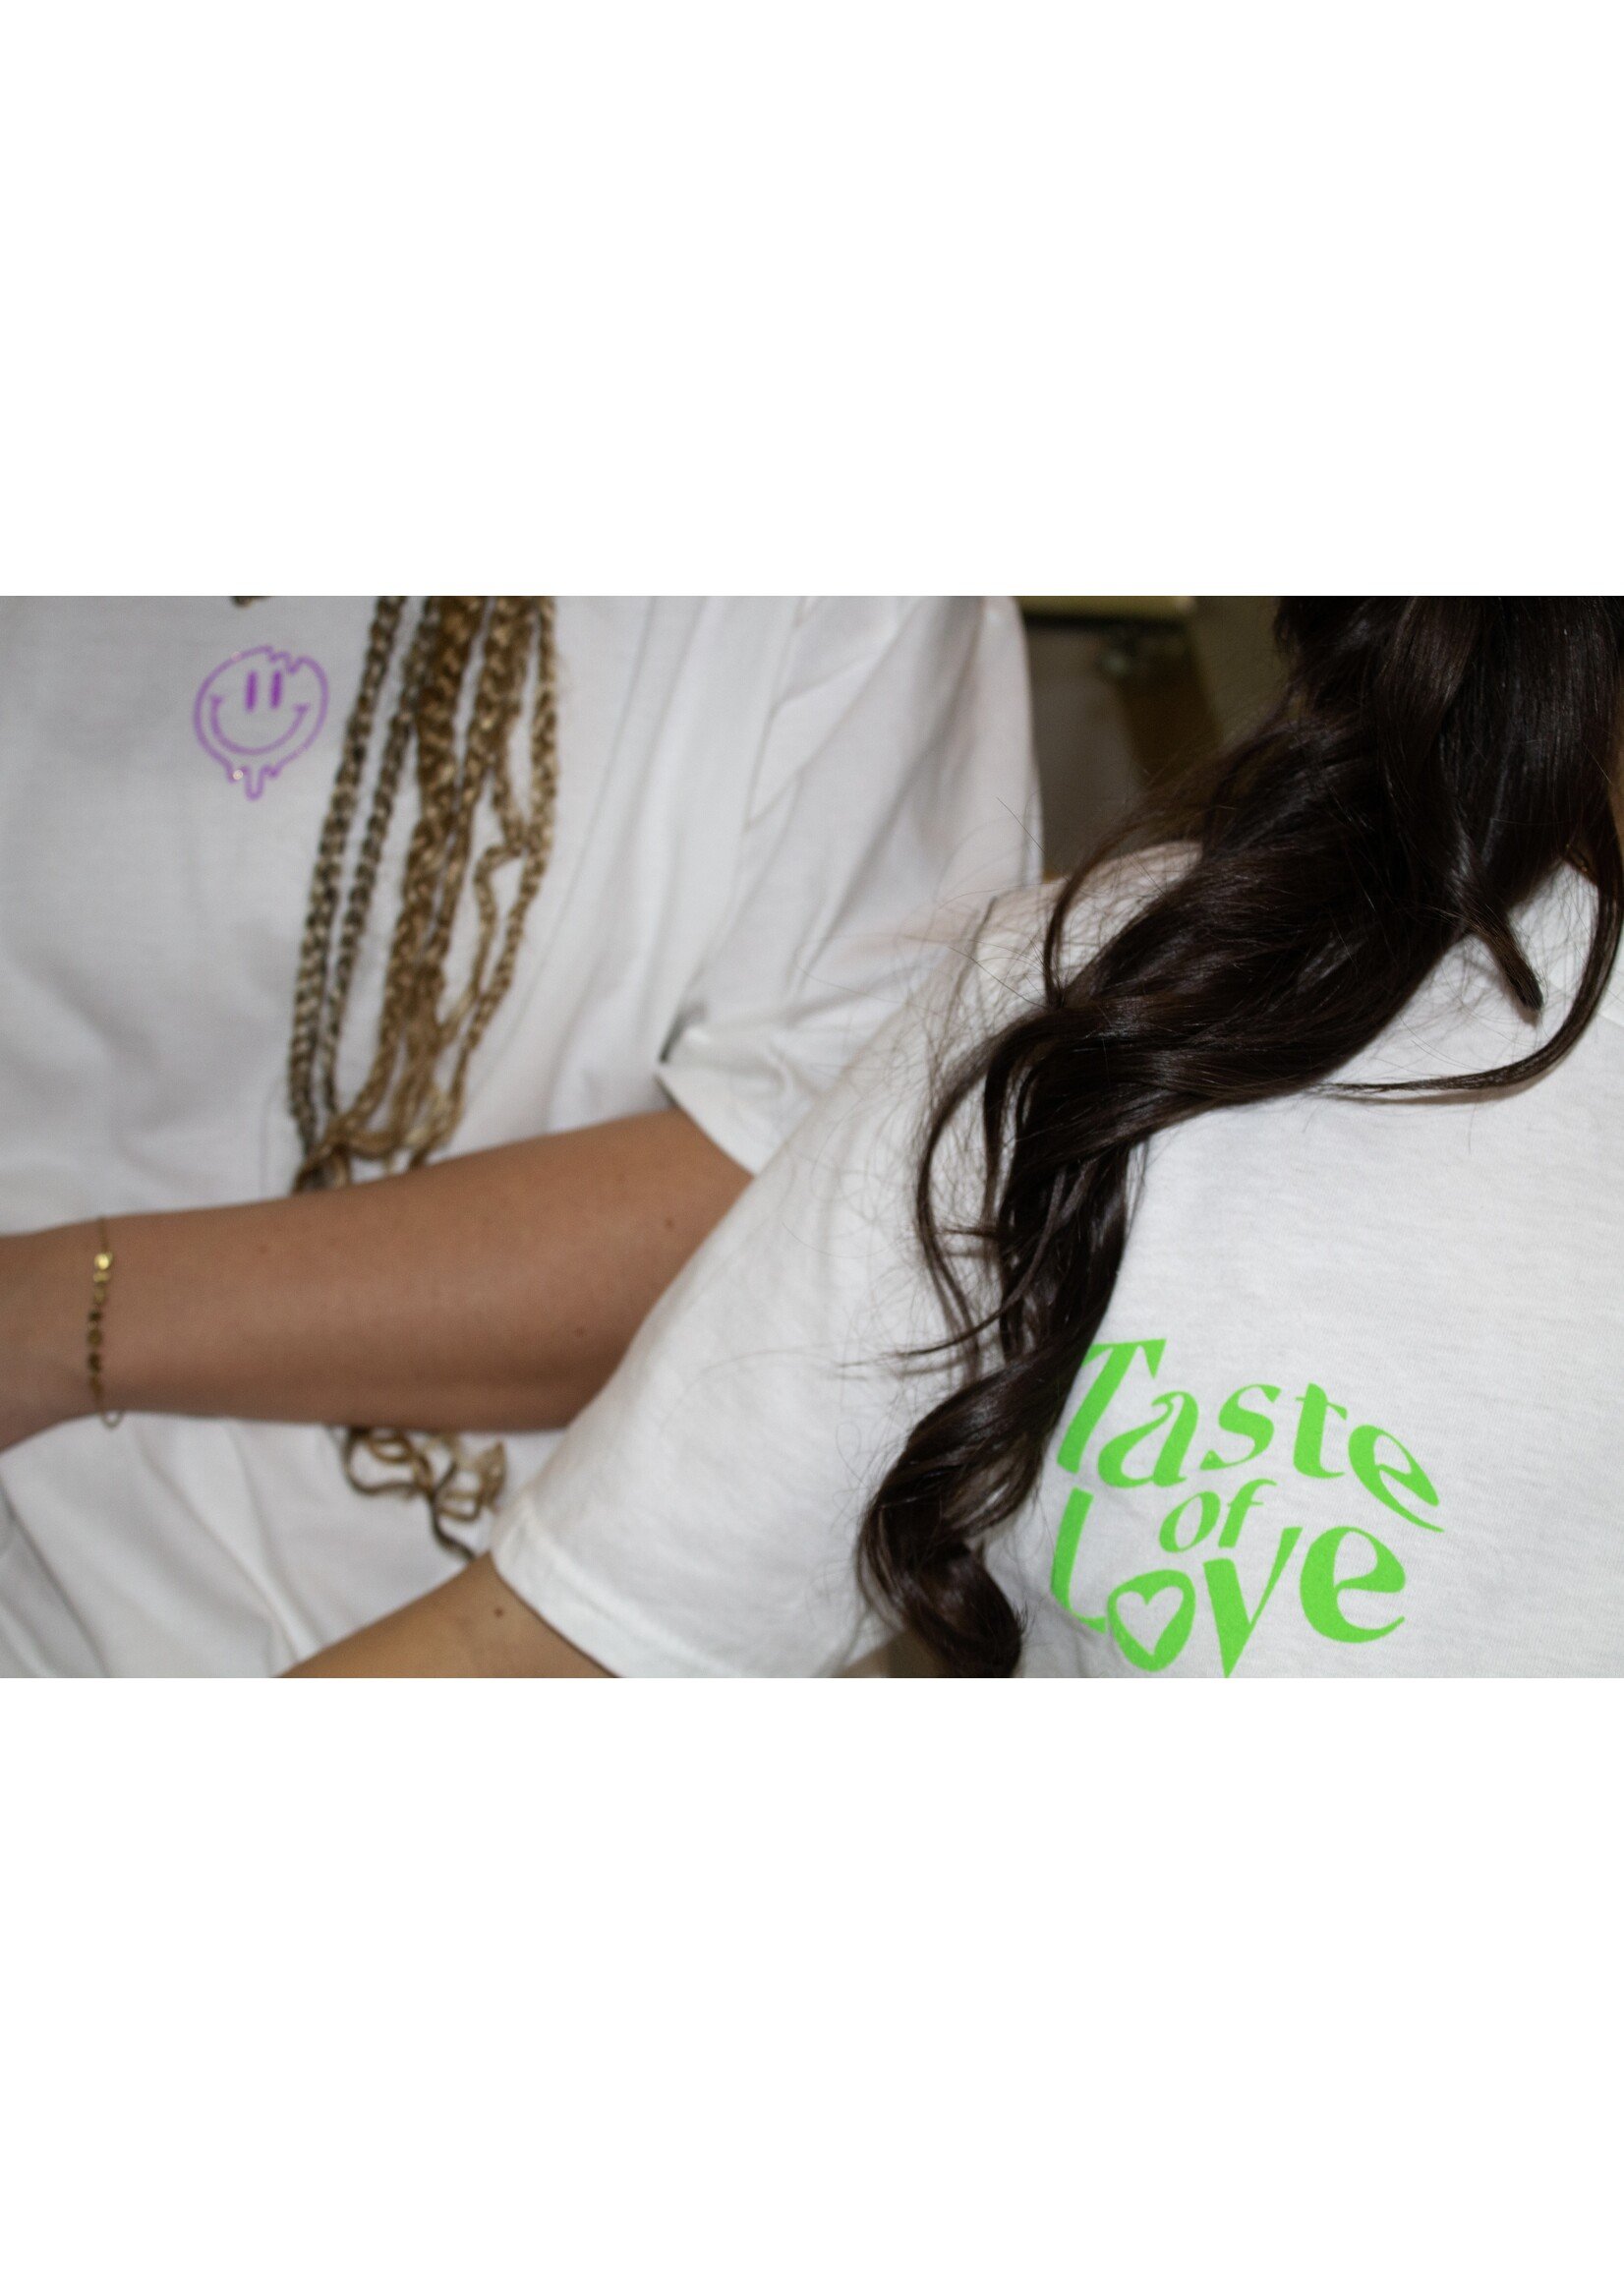 YOU ARE SPECIAL ''Taste of love'' White T-shirt